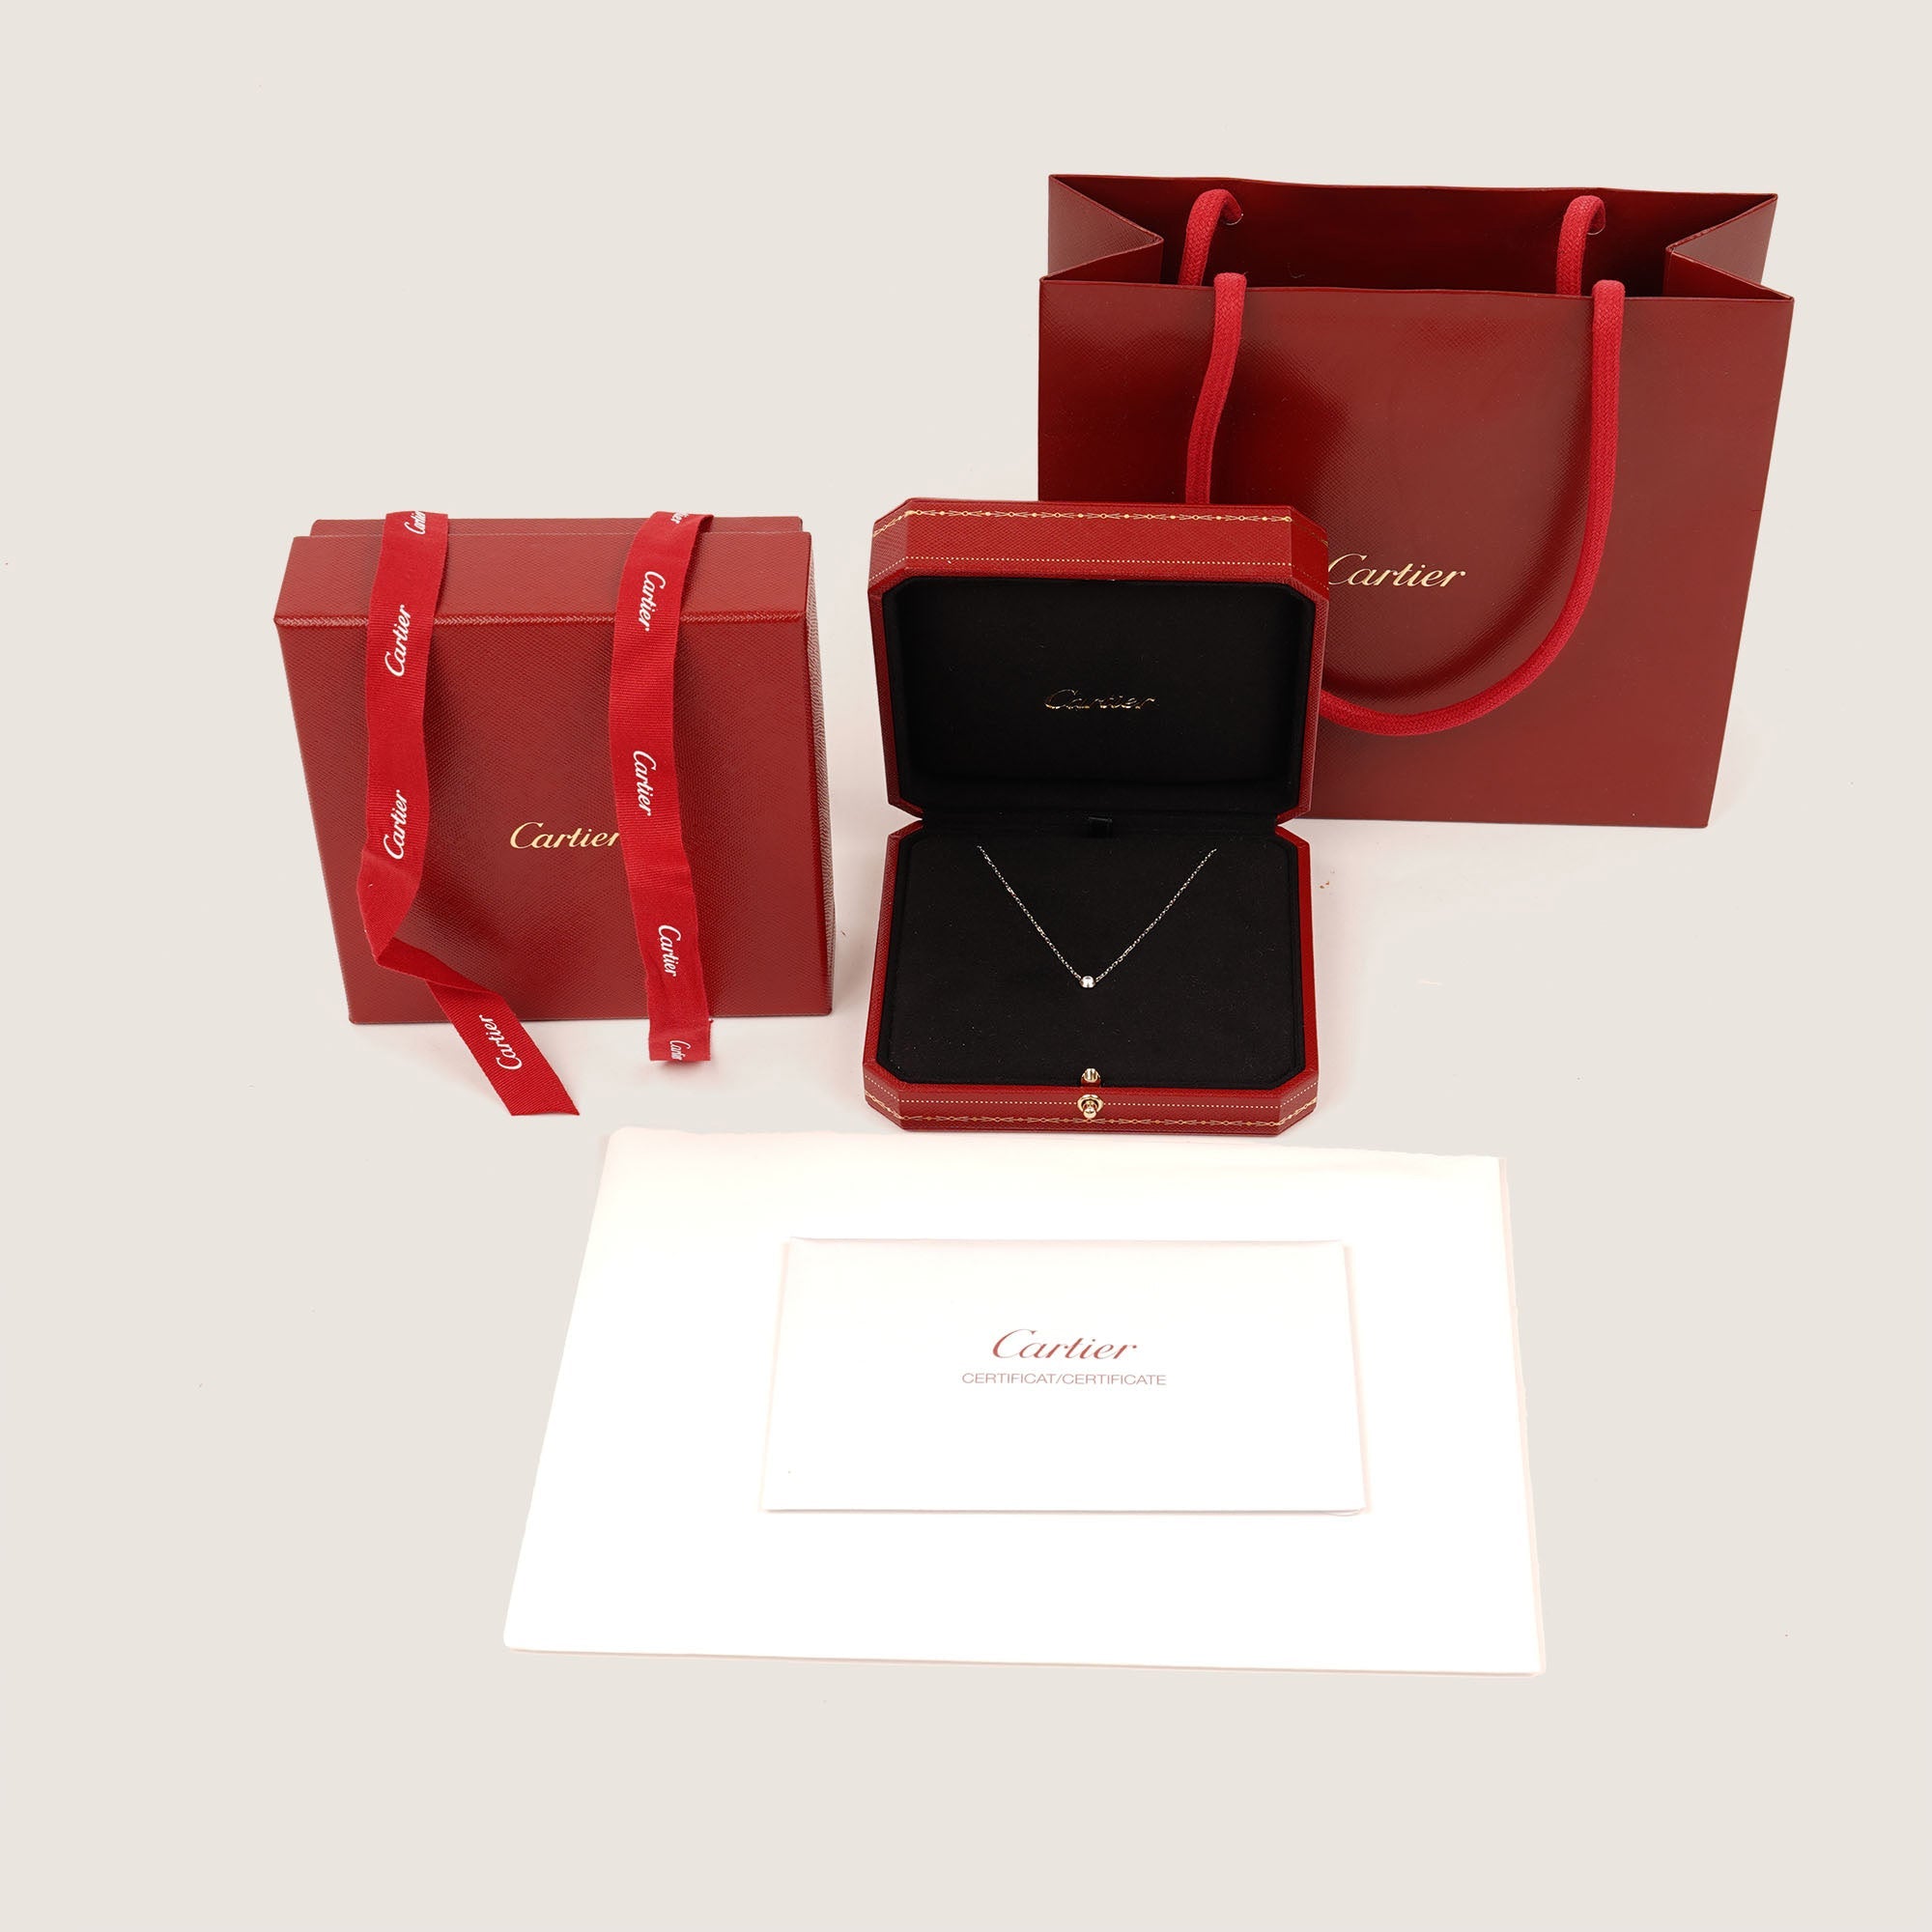 D'amour Necklace - CARTIER - Affordable Luxury image